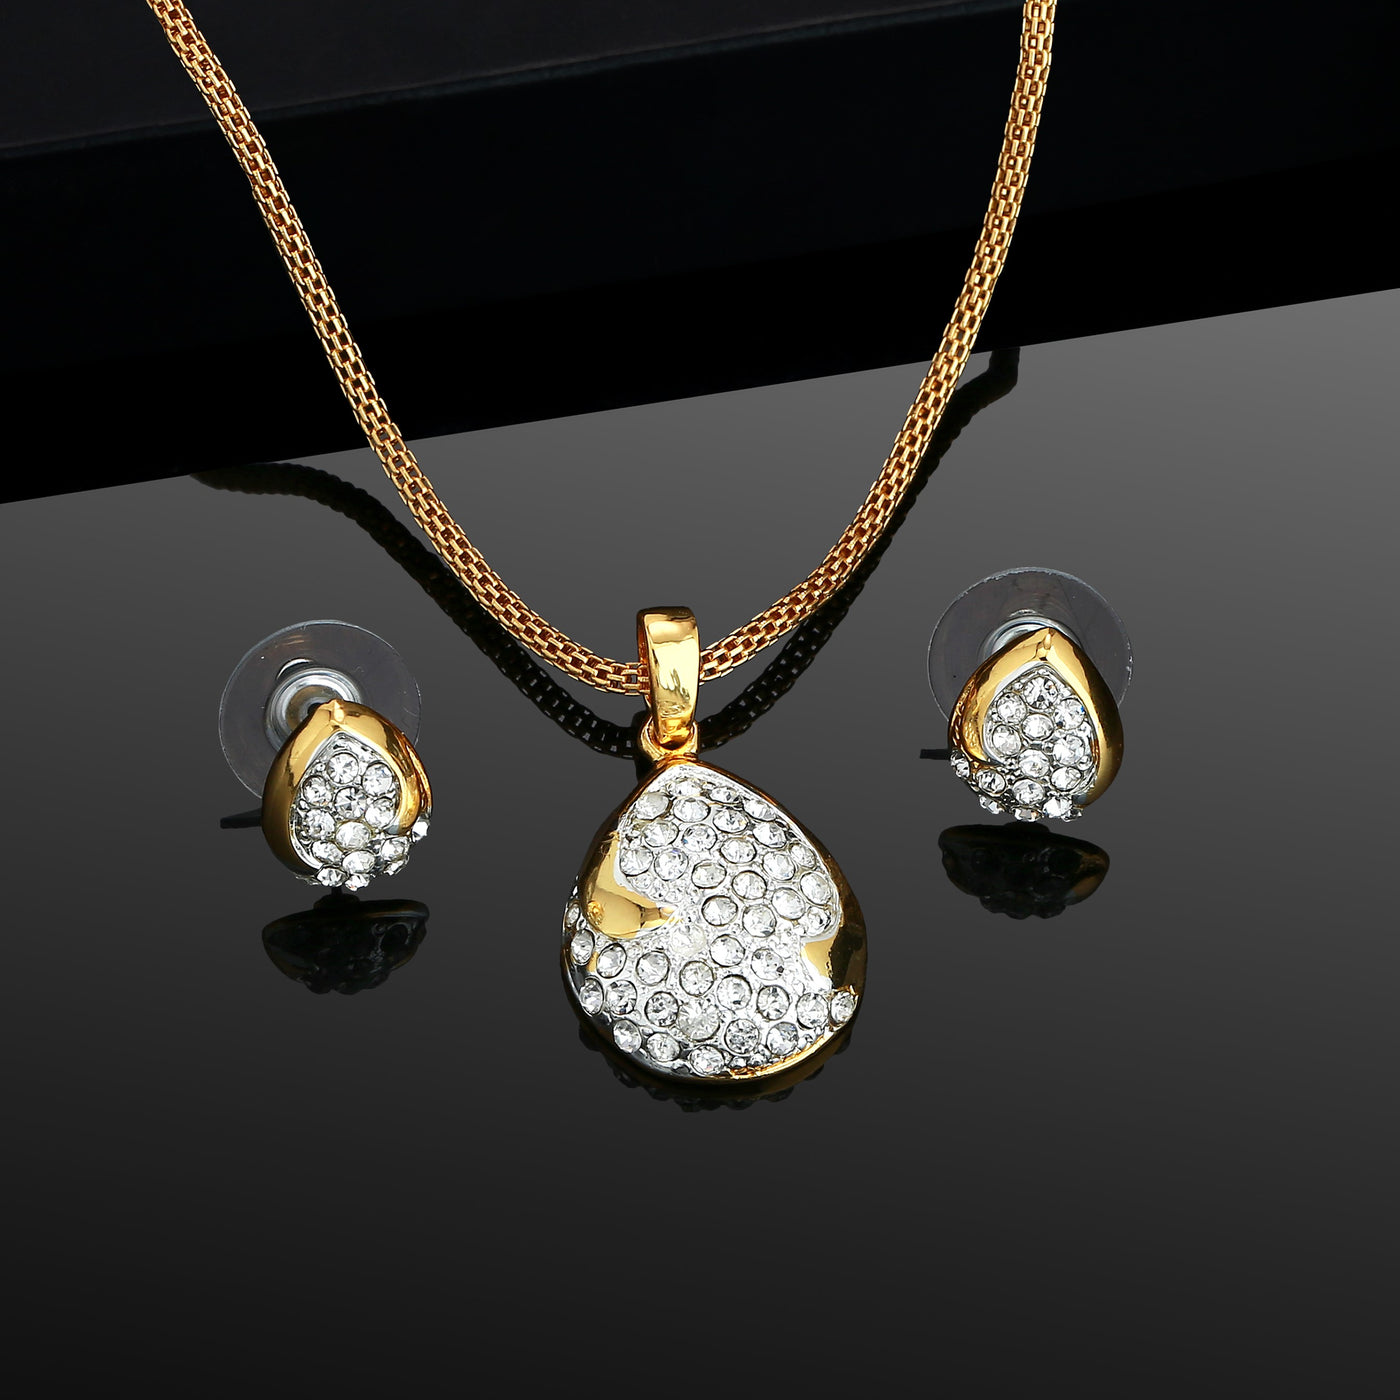 Estele - gold plated dazzling Pendant Set with austrian crystals